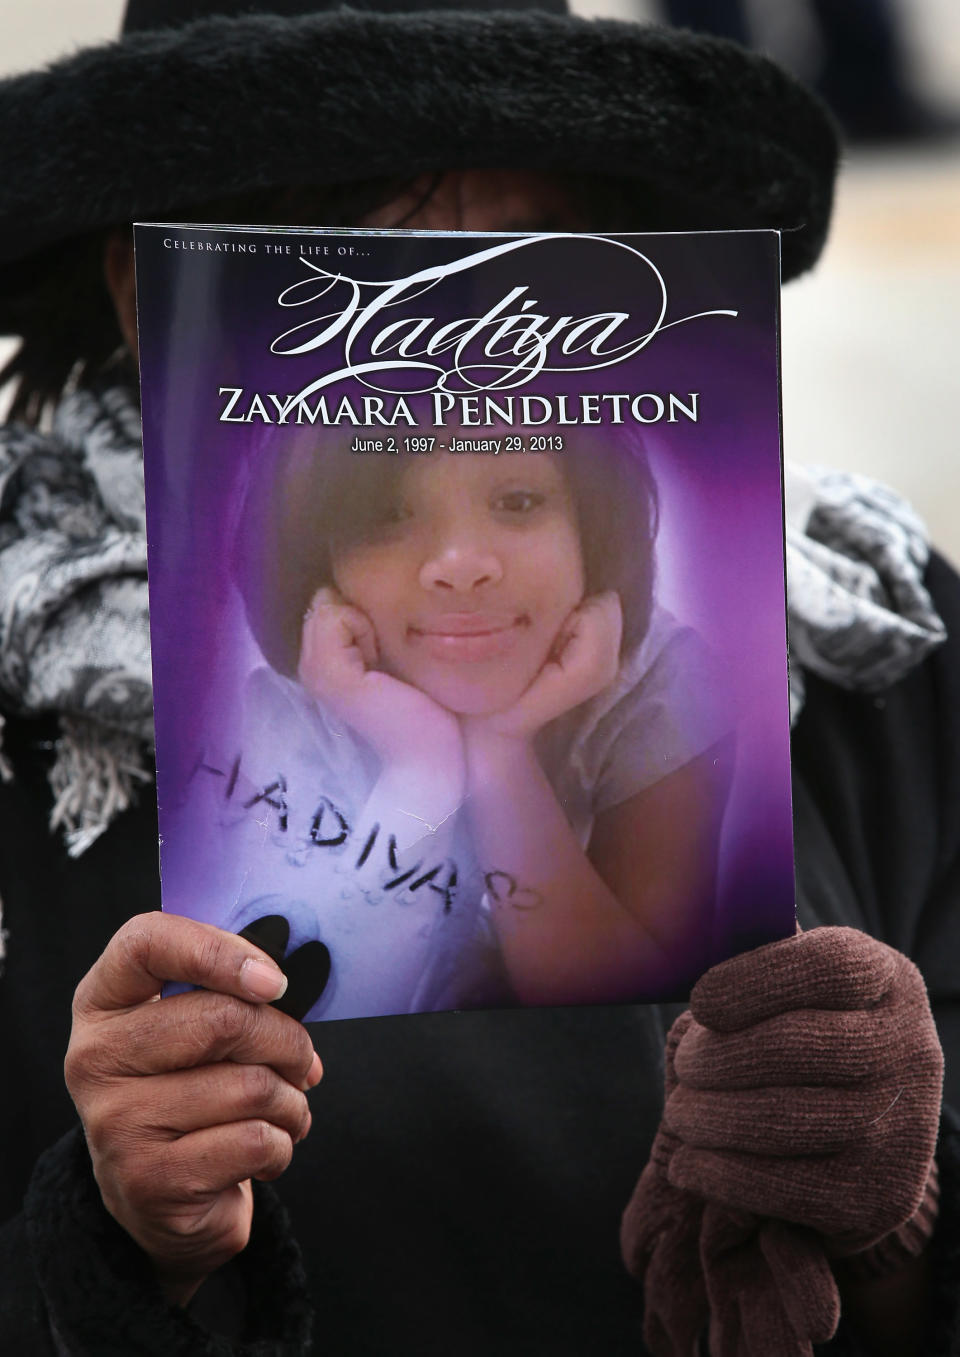 Minister Elnor Brown holds up a funeral program outside the Greater Harvest M.B. Church during the funeral of 15-year-old Hadiya Pendleton on Fe. 9, 2013, in Chicago, Illinois. (Photo: Scott Olson via Getty Images)